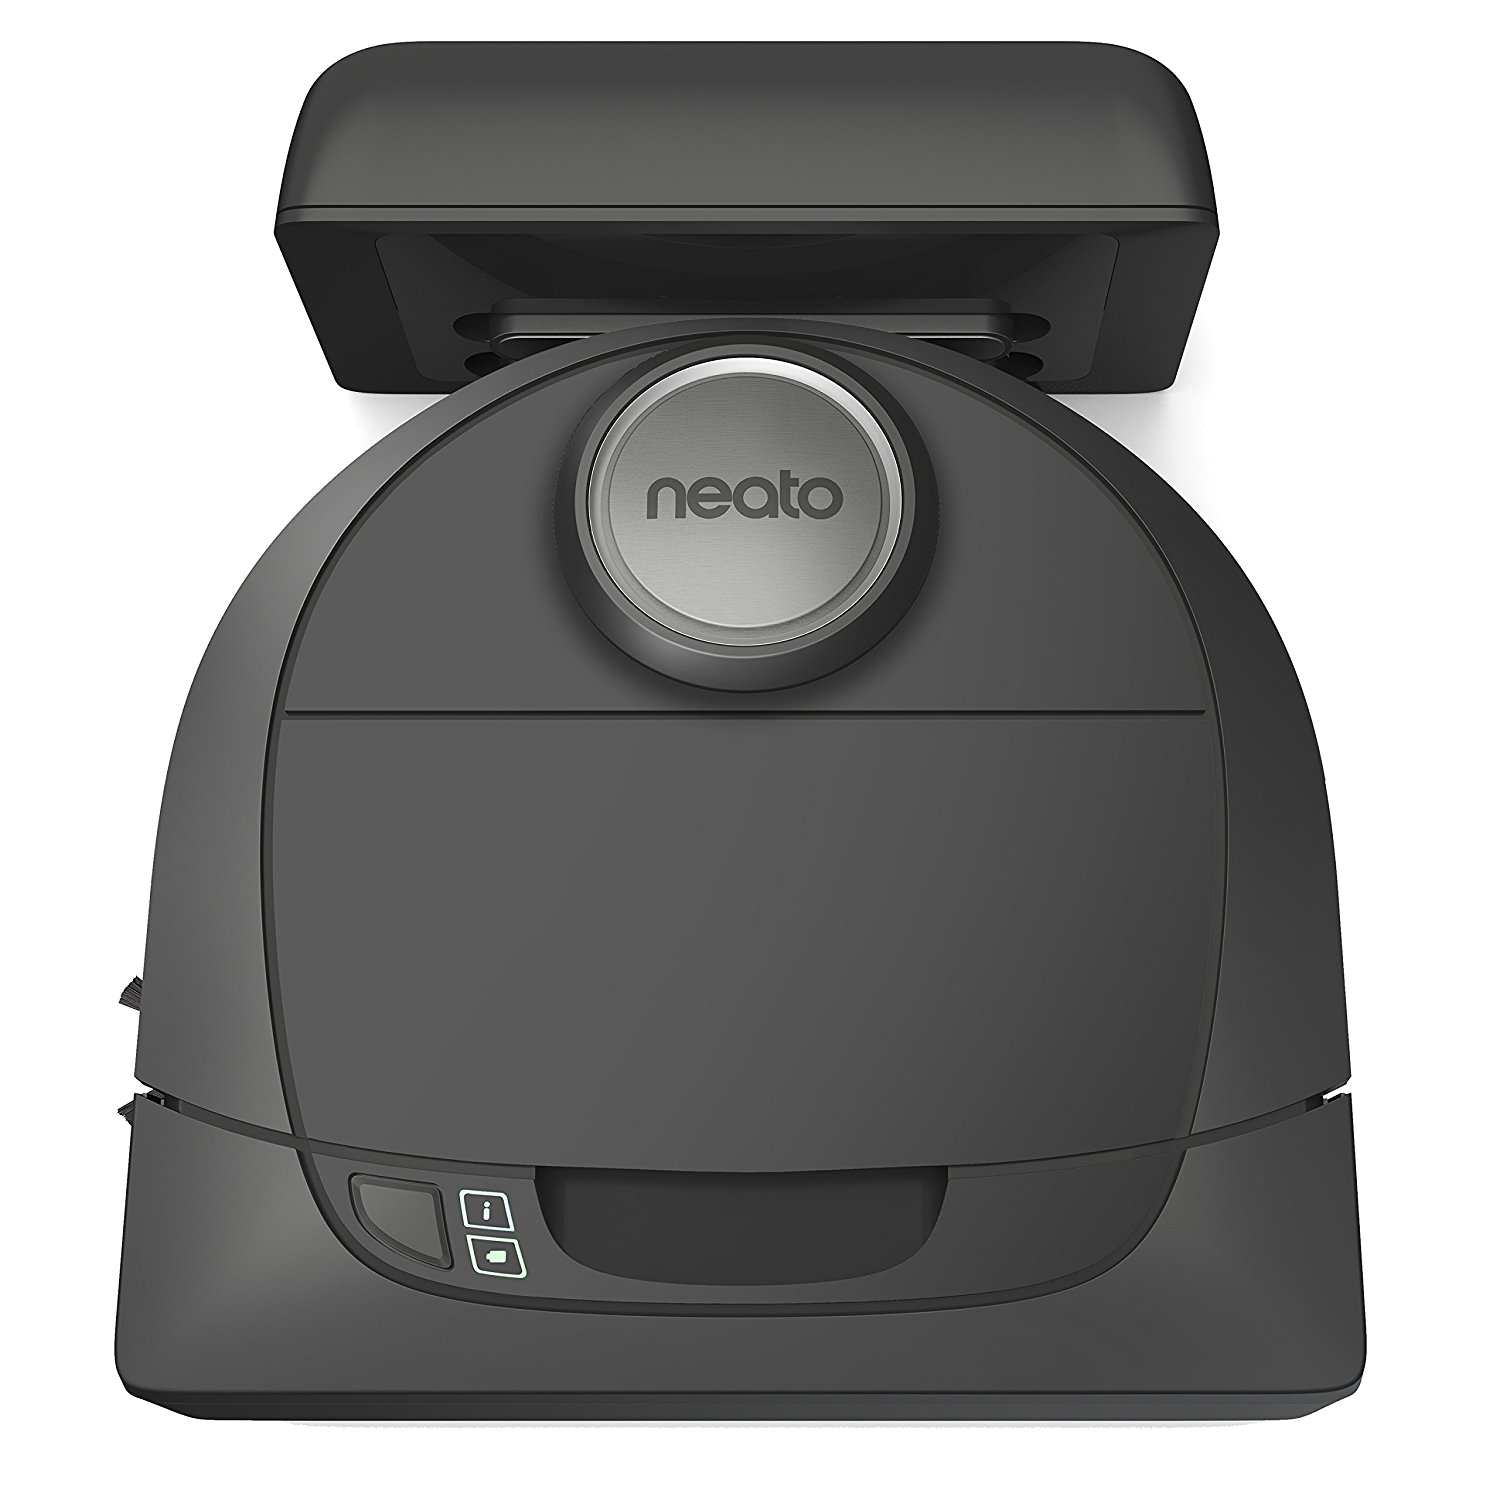 amazon com neato botvac d5 connected navigating robot vacuum pet allergy works with alexa home kitchen